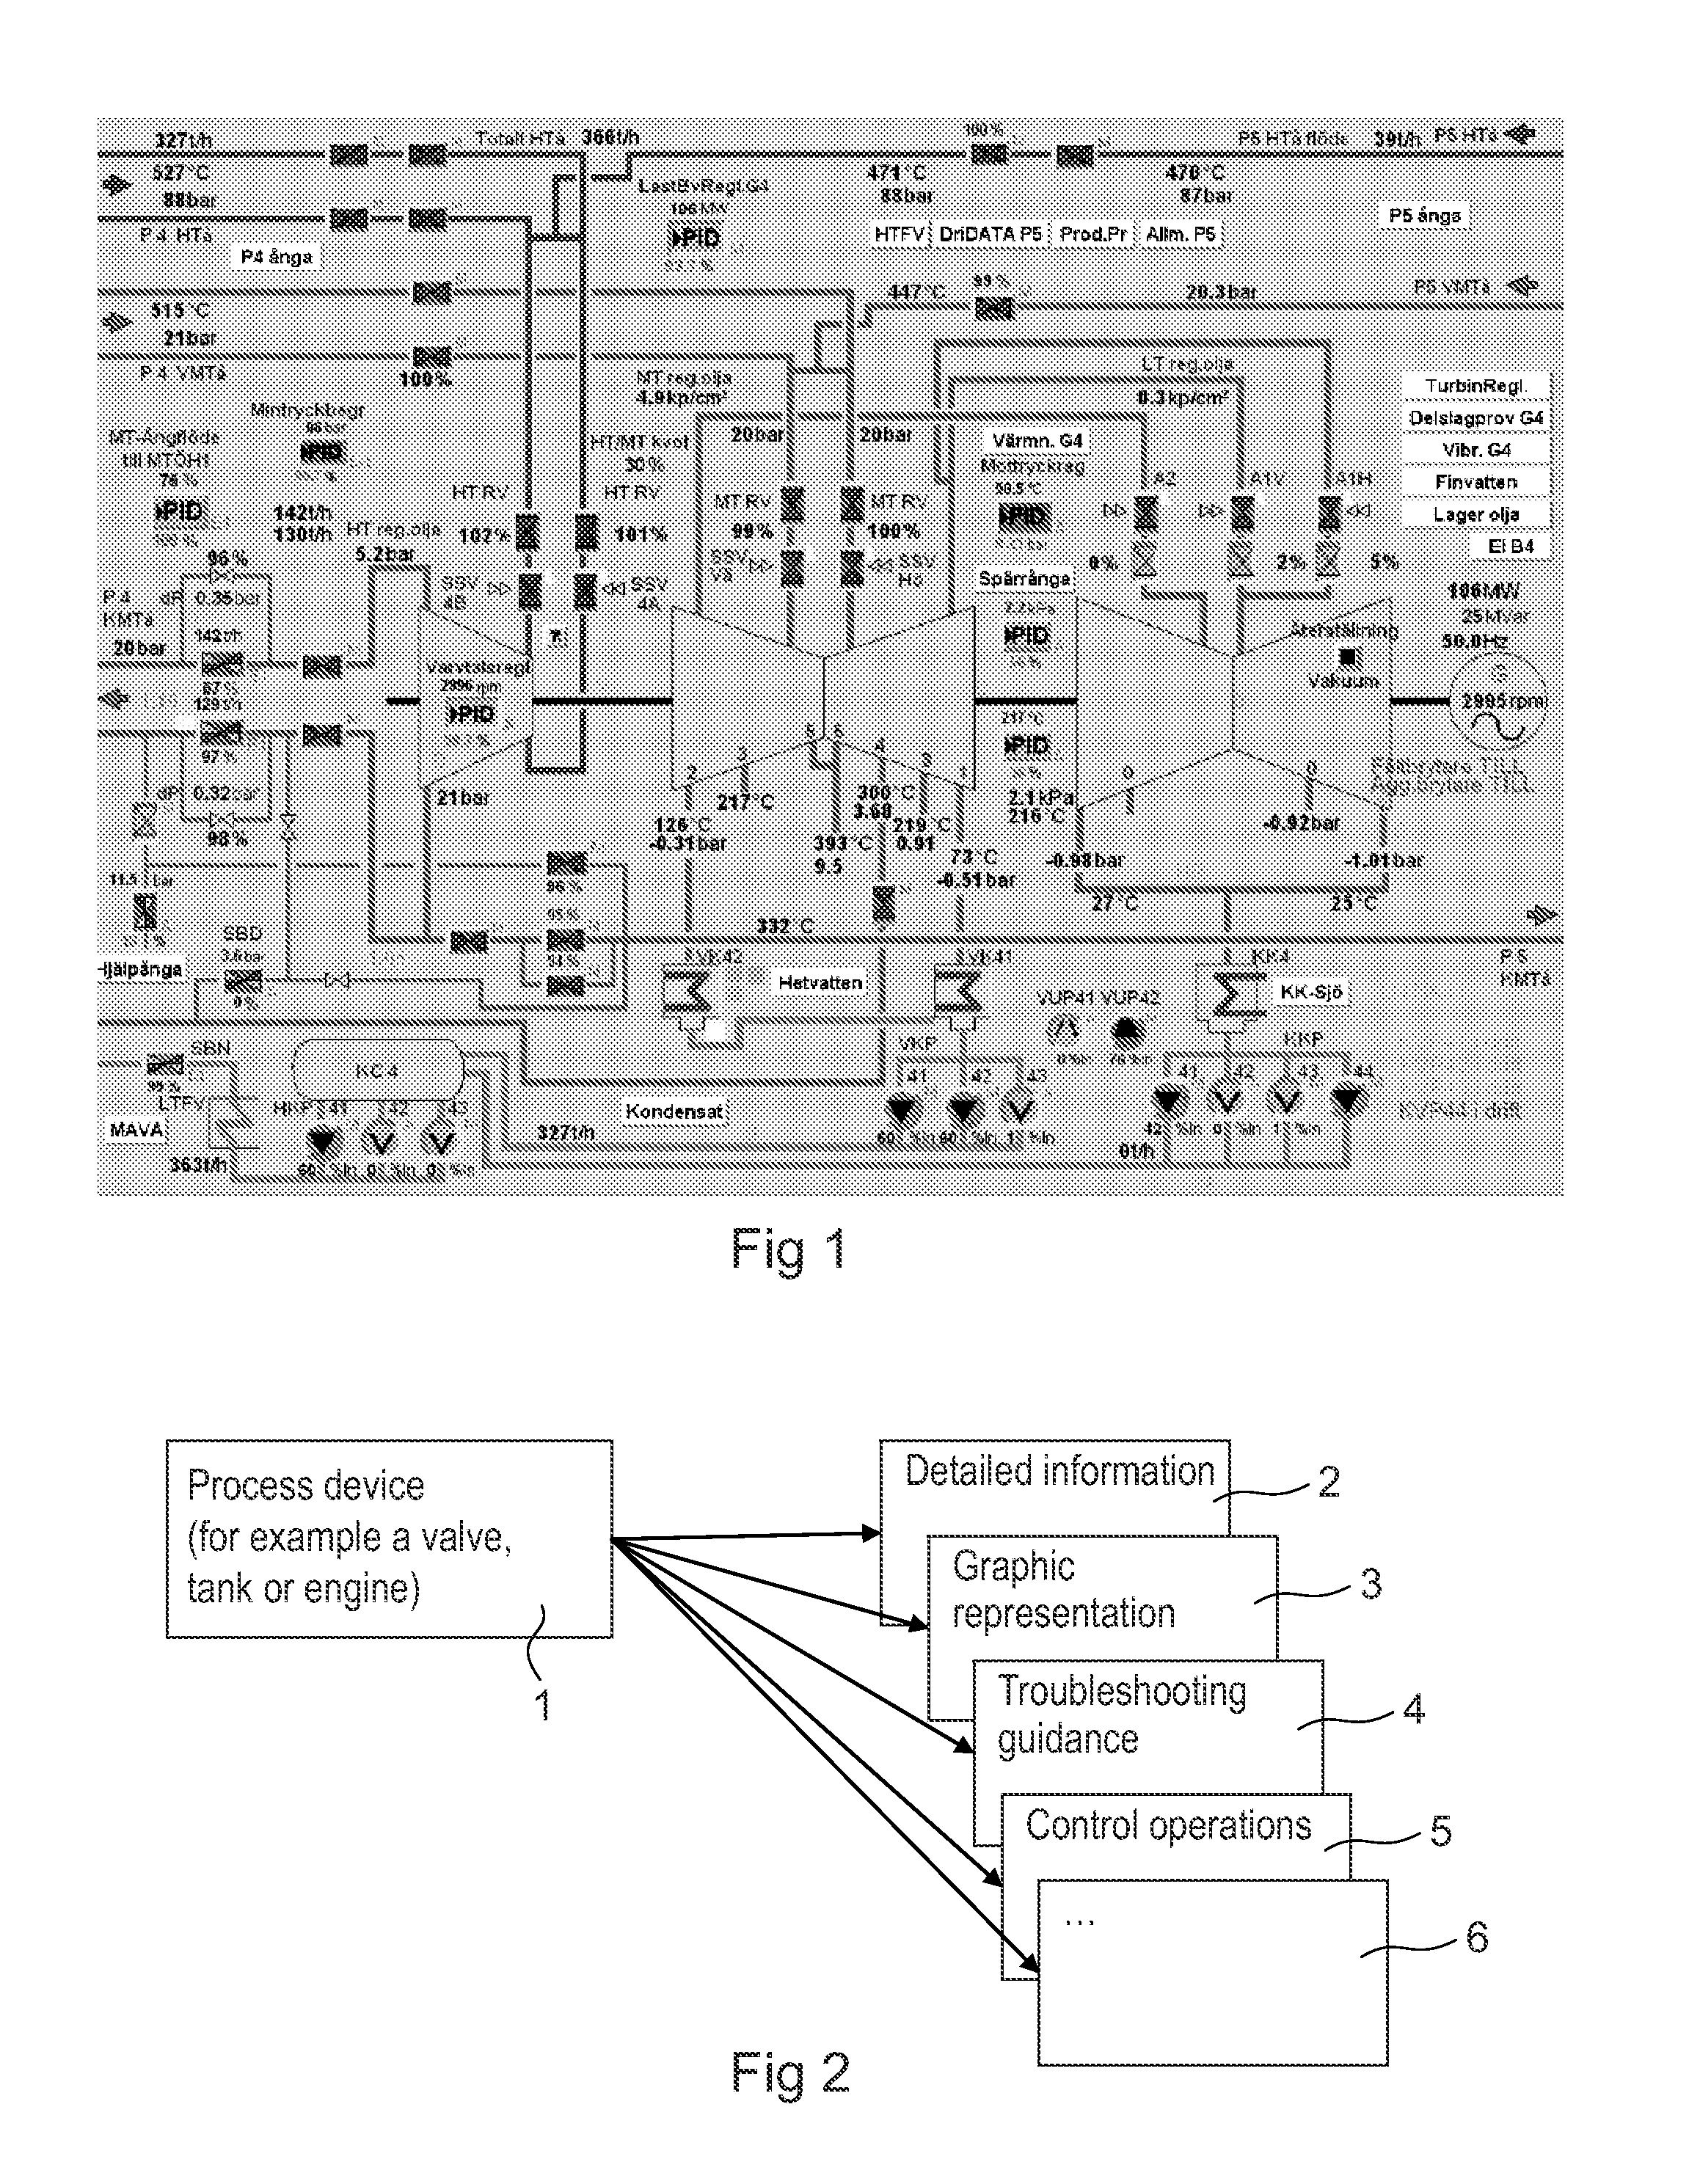 Method And Computer Program Products For Enabling Supervision And Control Of A Technical System